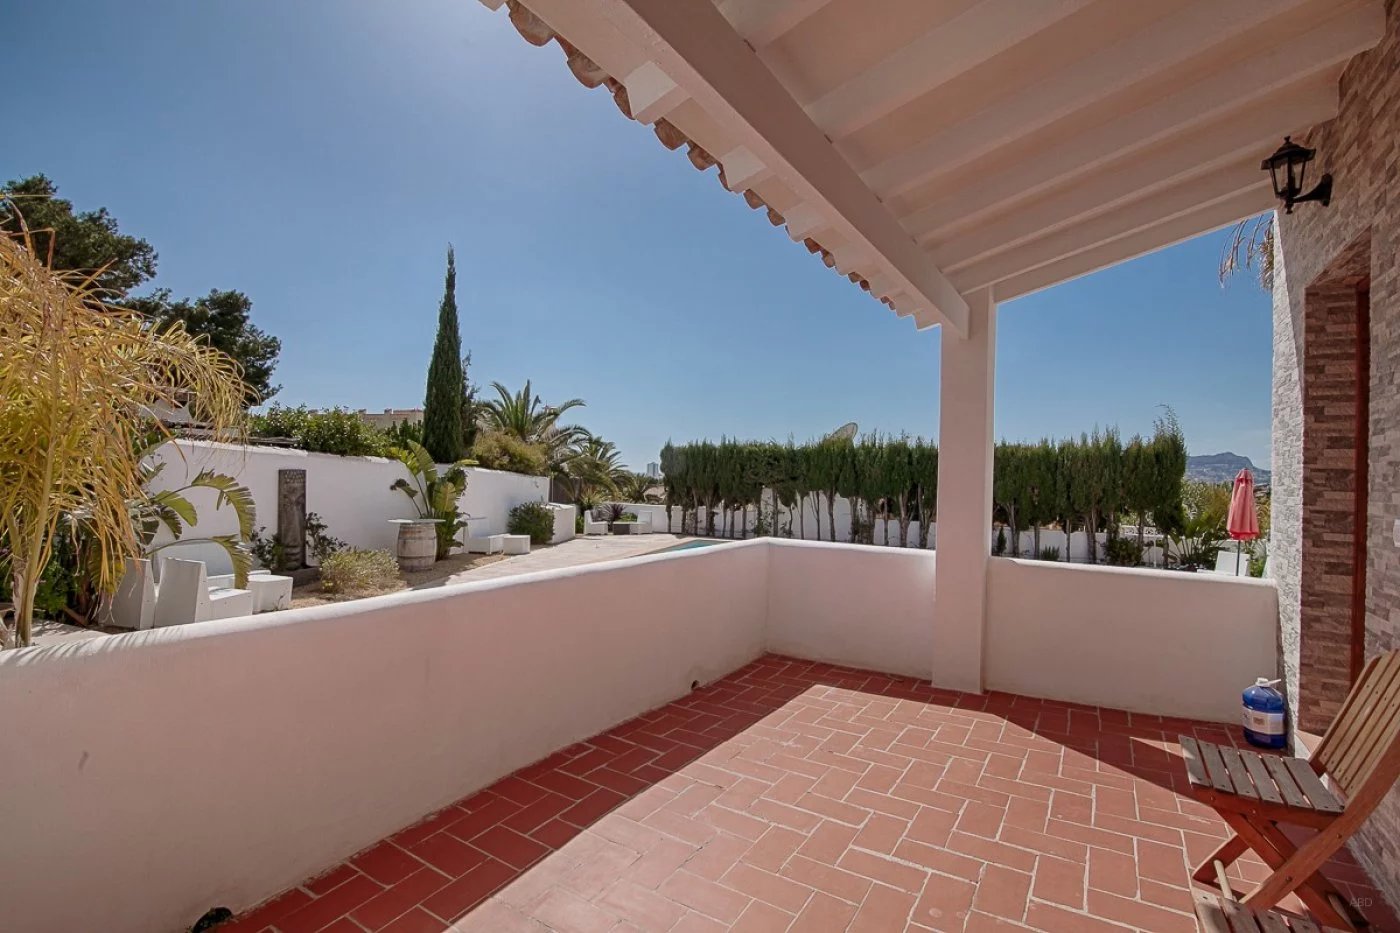 Renovated villa with 5 independent apartments and panoramic view